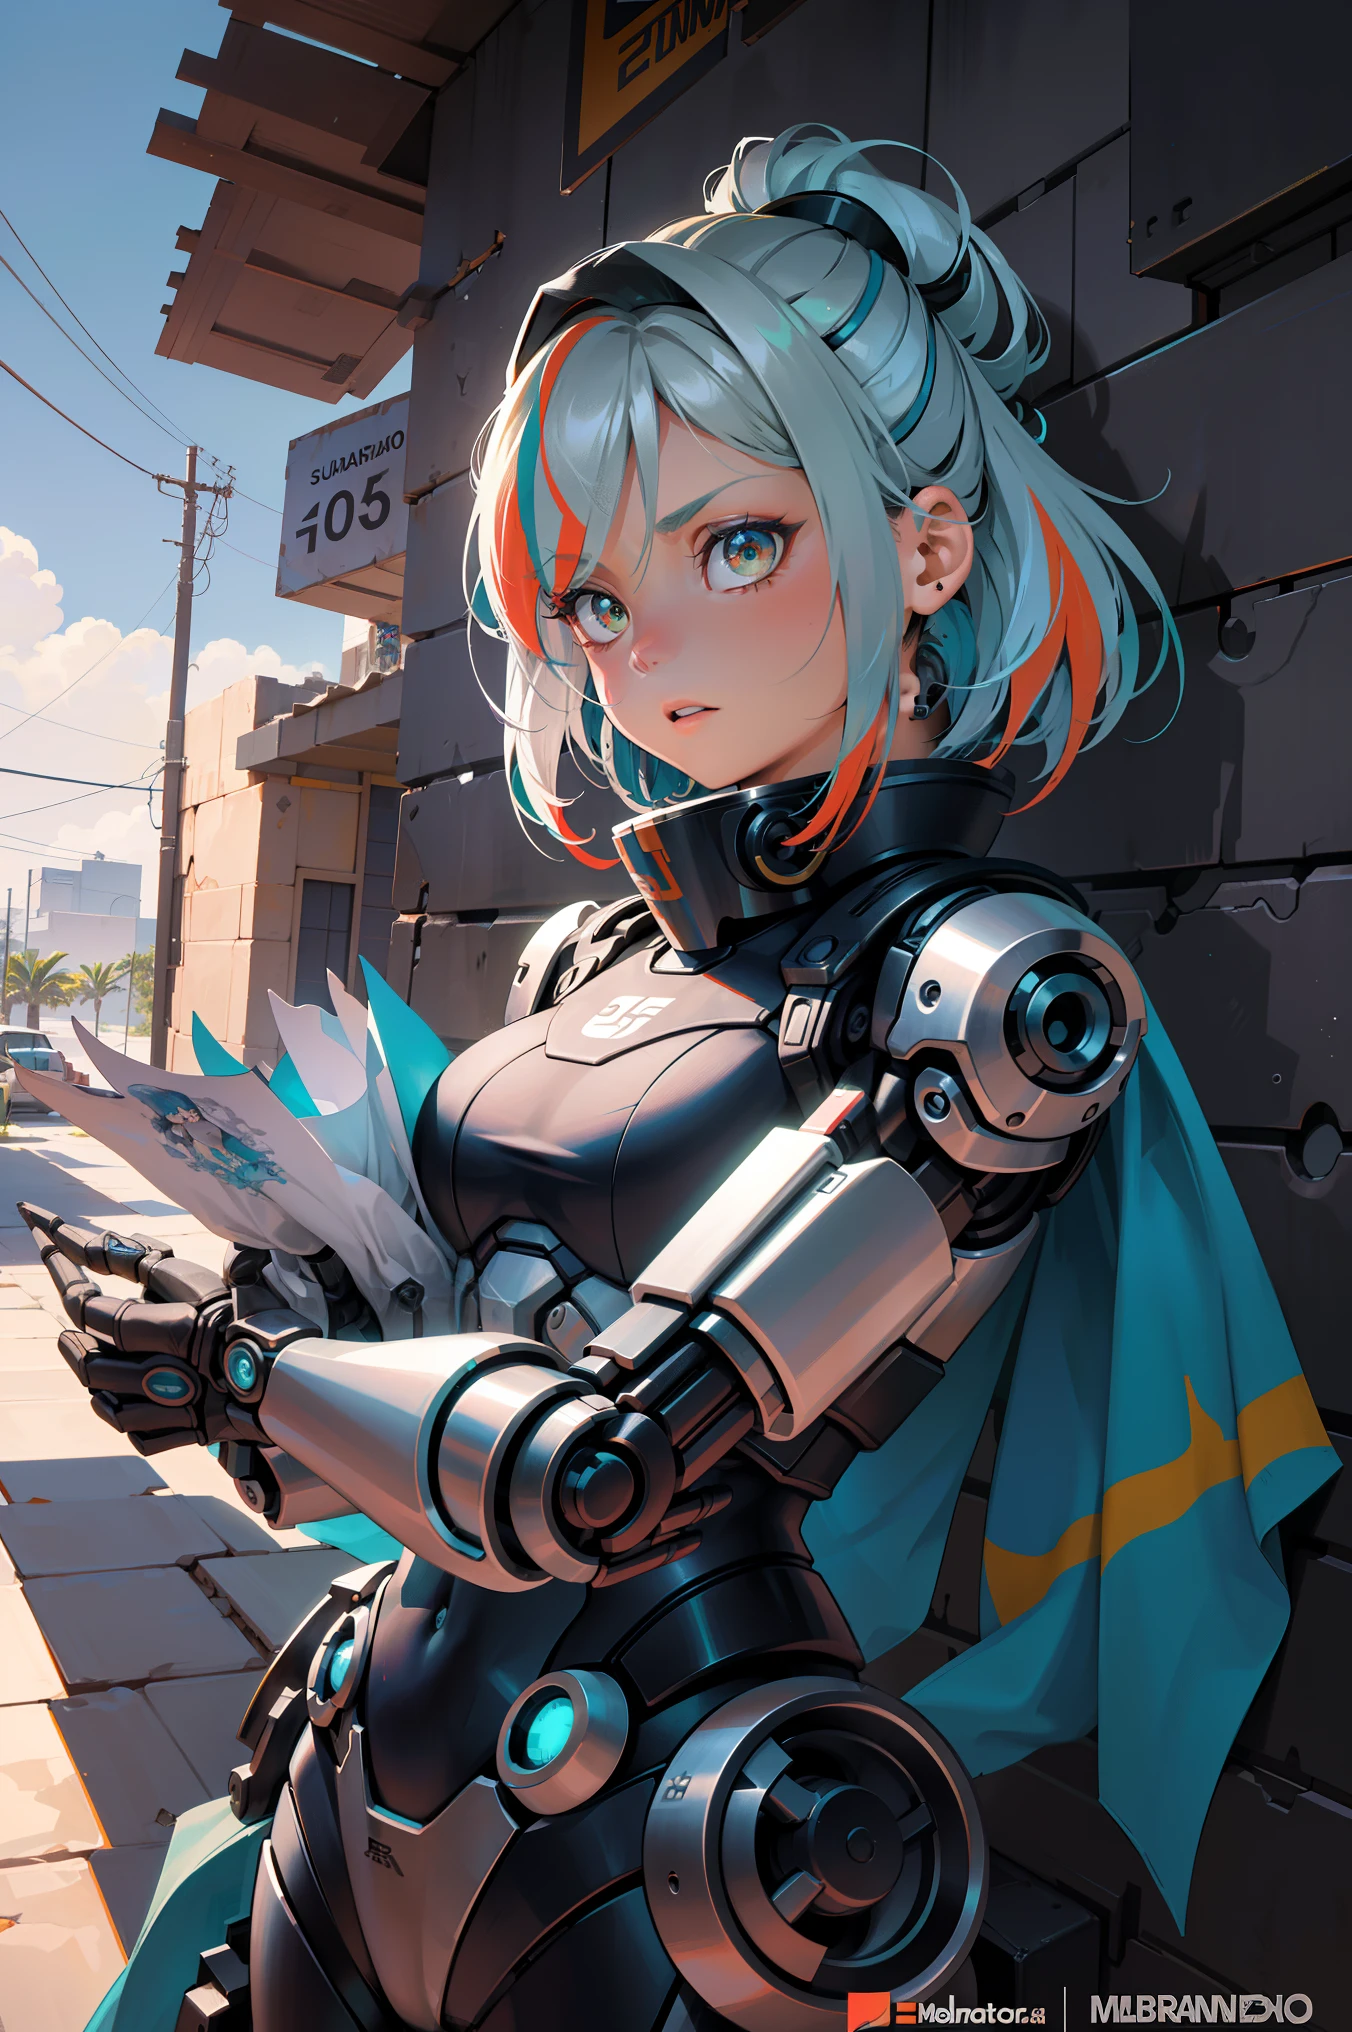 Science fiction, (work of art, best qualityer, ultra detaild), ((multicolored hair, Bblack hair, hair blue)), greeneyes, suffering, (1 girl:1.6), Dynamic lanes, swirly vibrant colors,  tecnology, manga influence, comic, handgun, Mechagirl, Full Armor, cables, extremely detailed wallpaper, ((mechanical members)), unexpressive, biomechanical, mecha